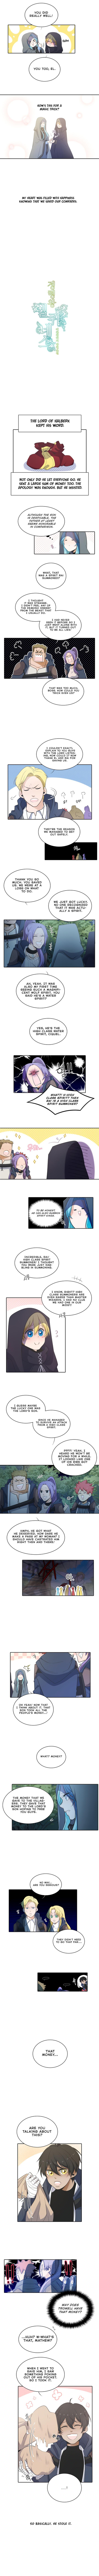 Elqueeness - Page 3